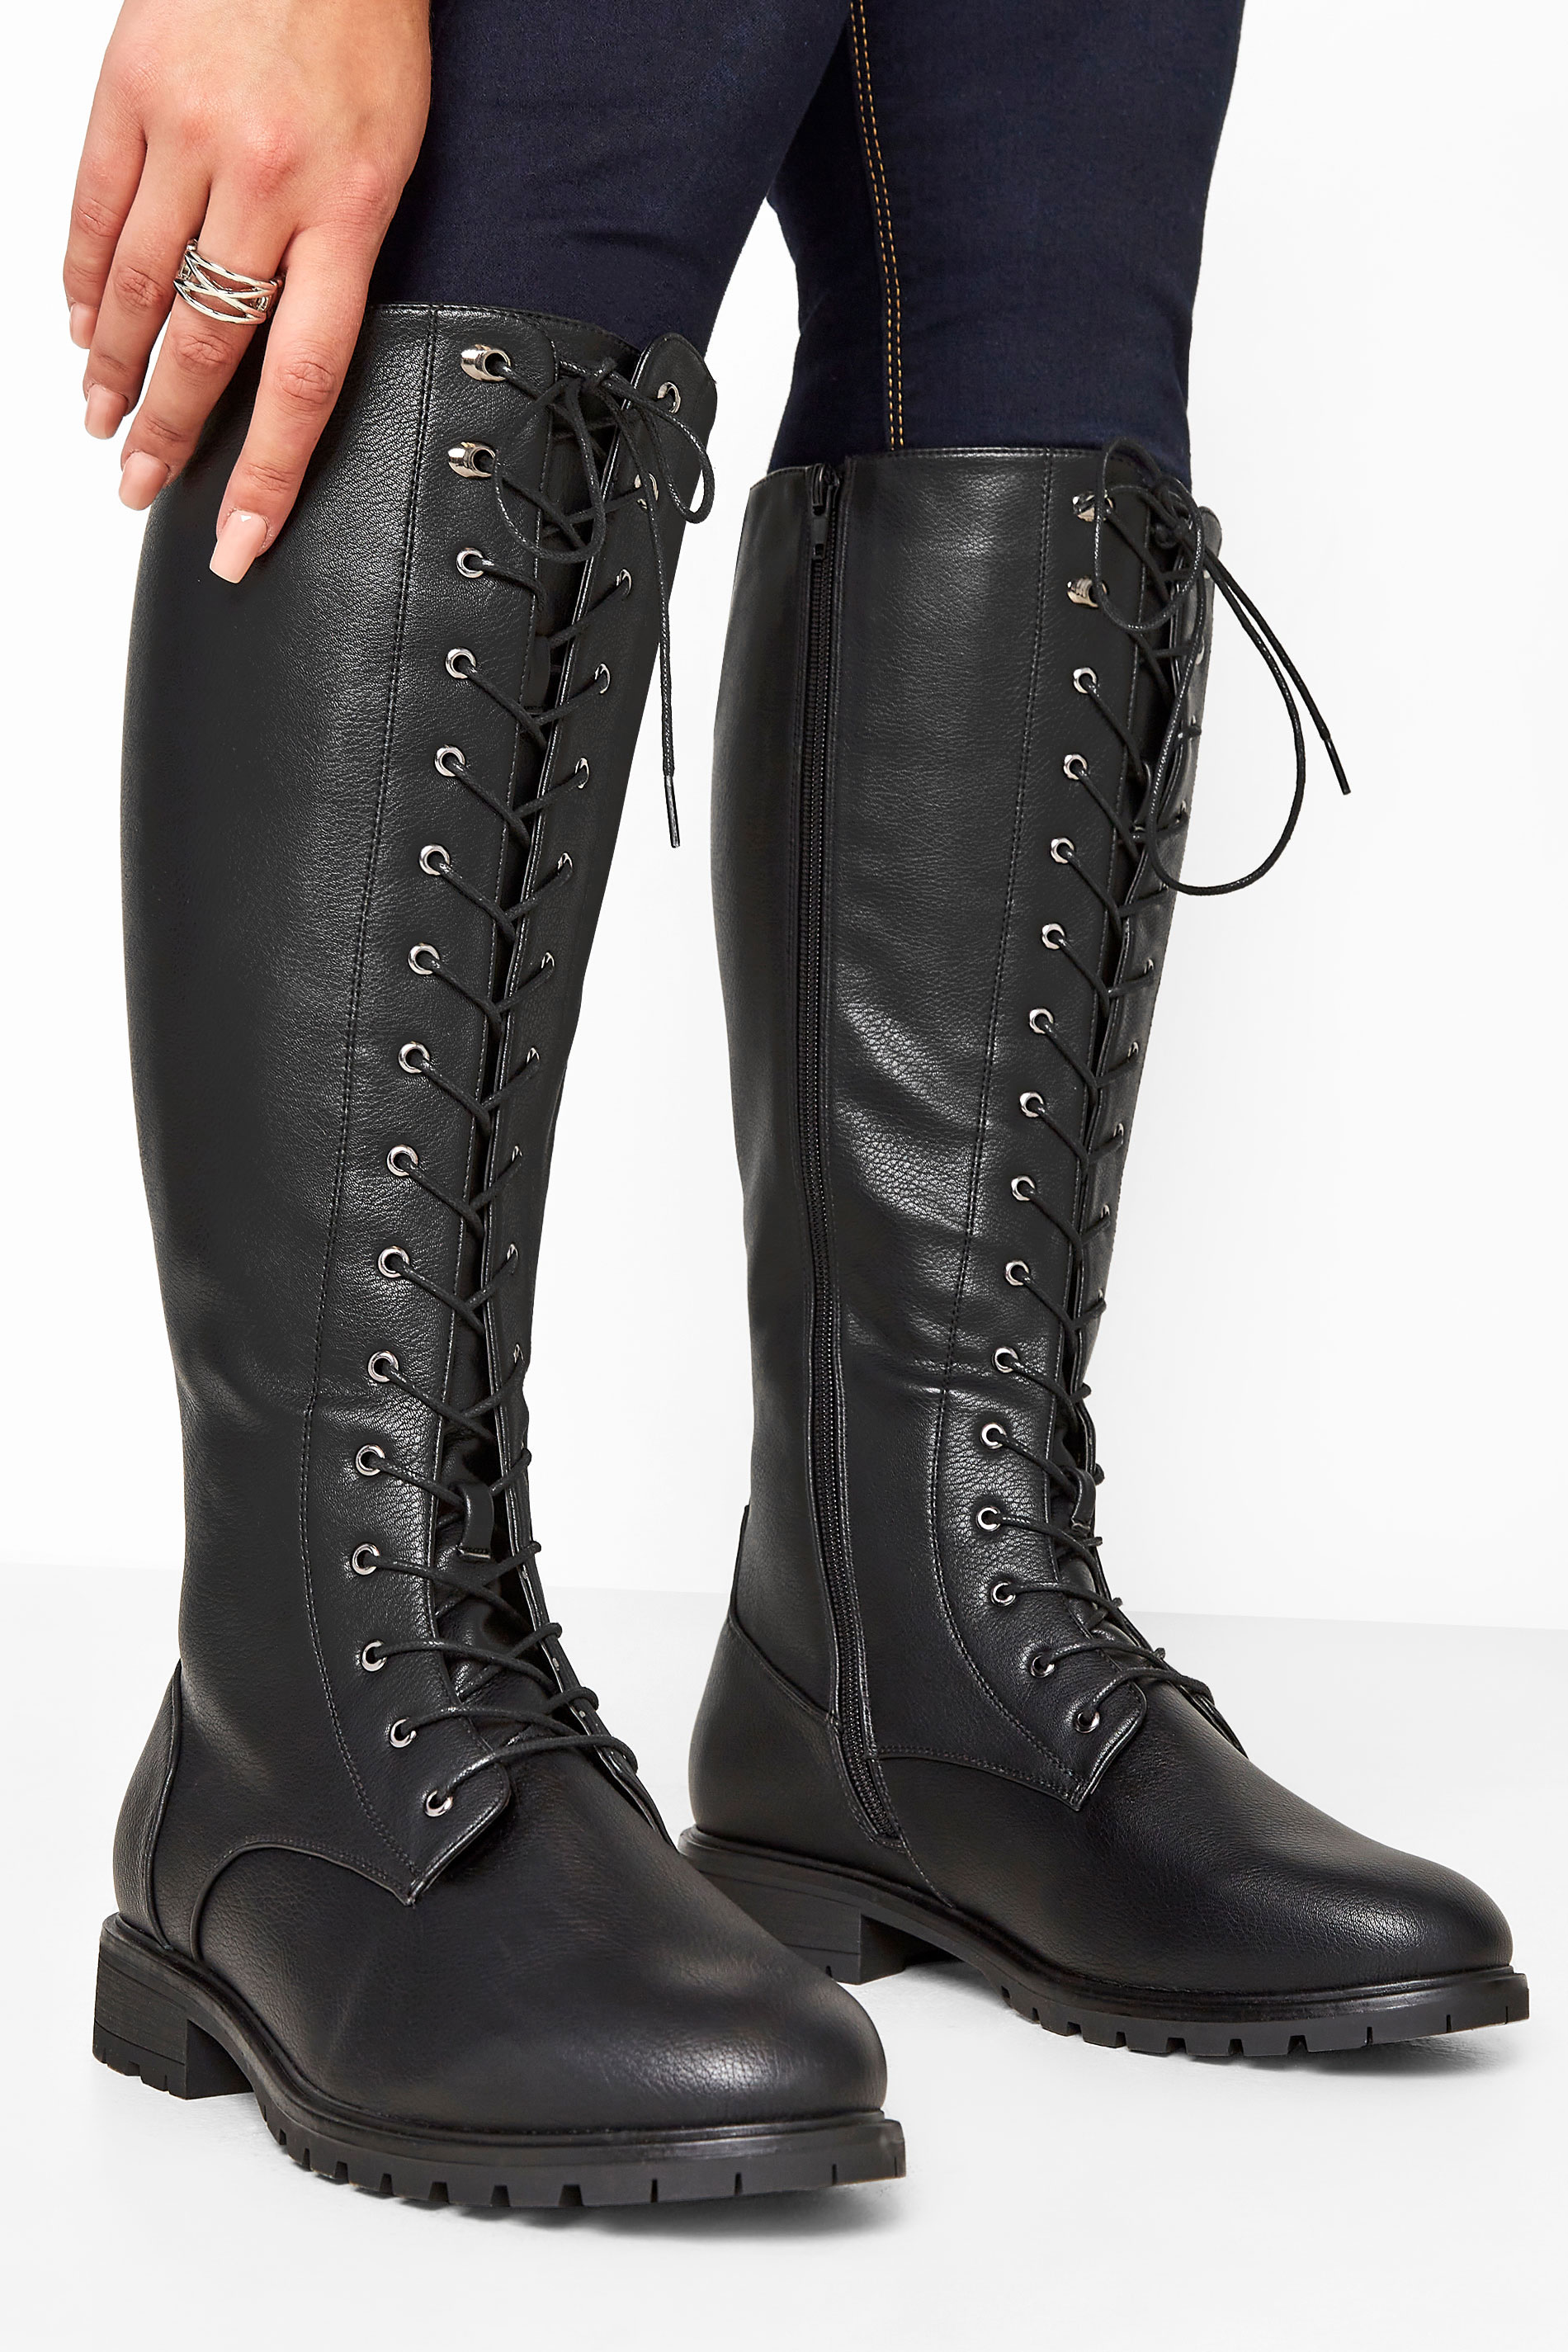 Black Vegan Faux Leather Lace Up Knee High Boots In Extra Wide EEE Fit 1